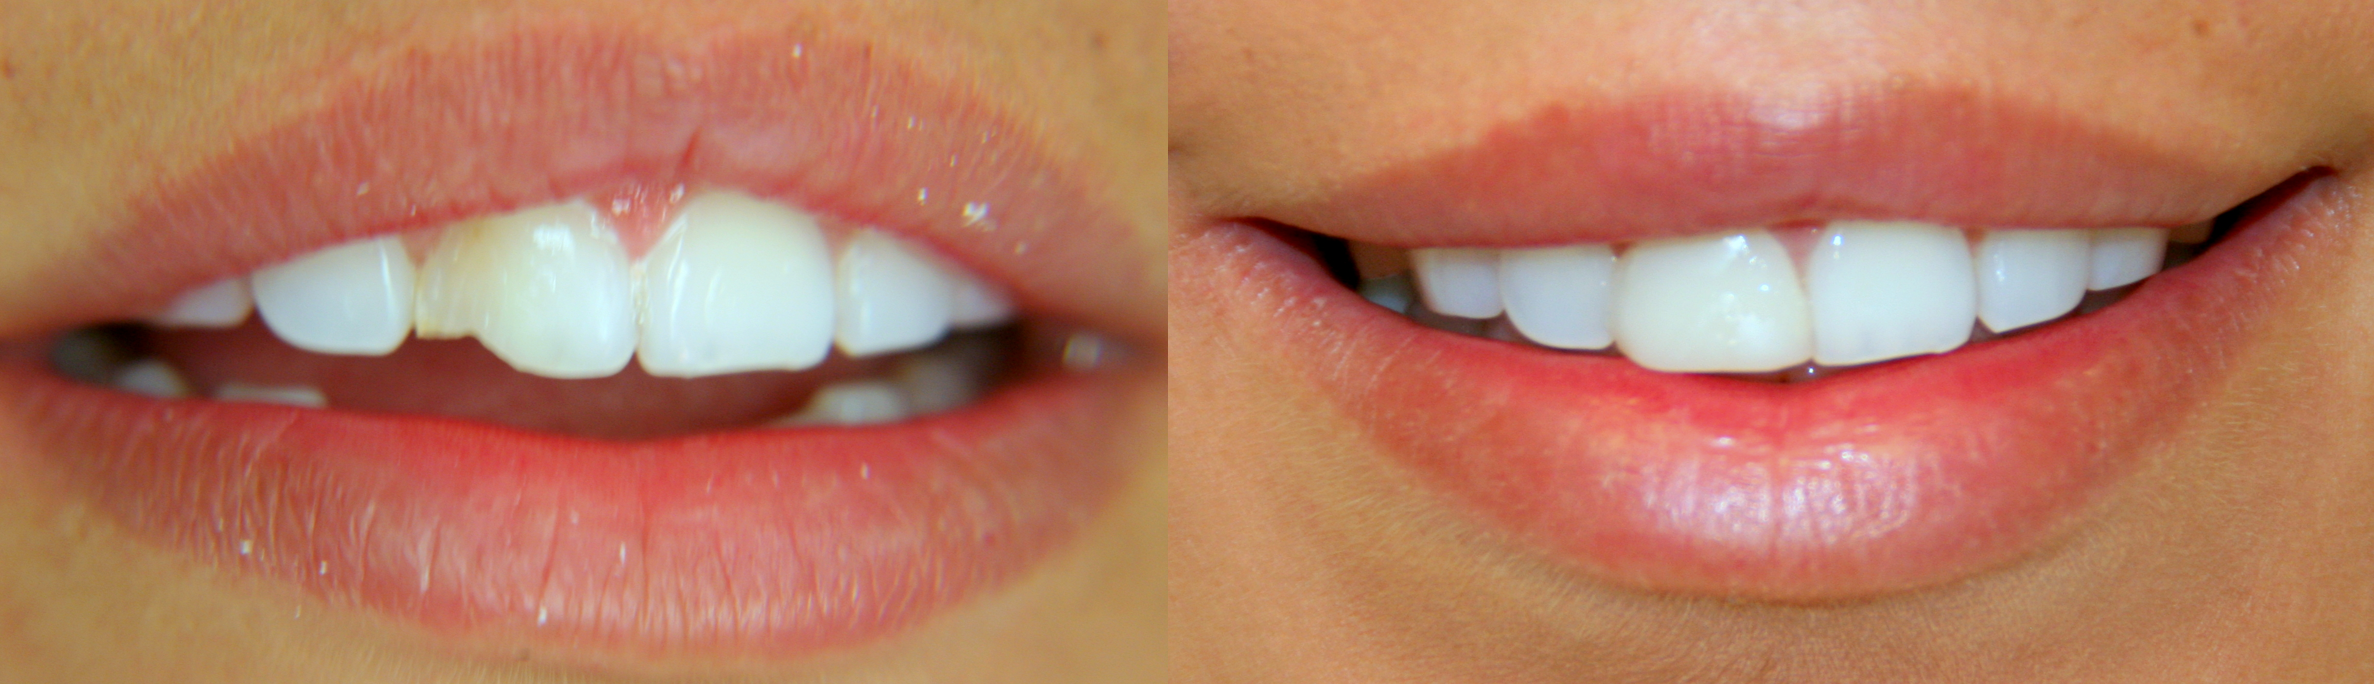  Restoration of chipped tooth with veneers 